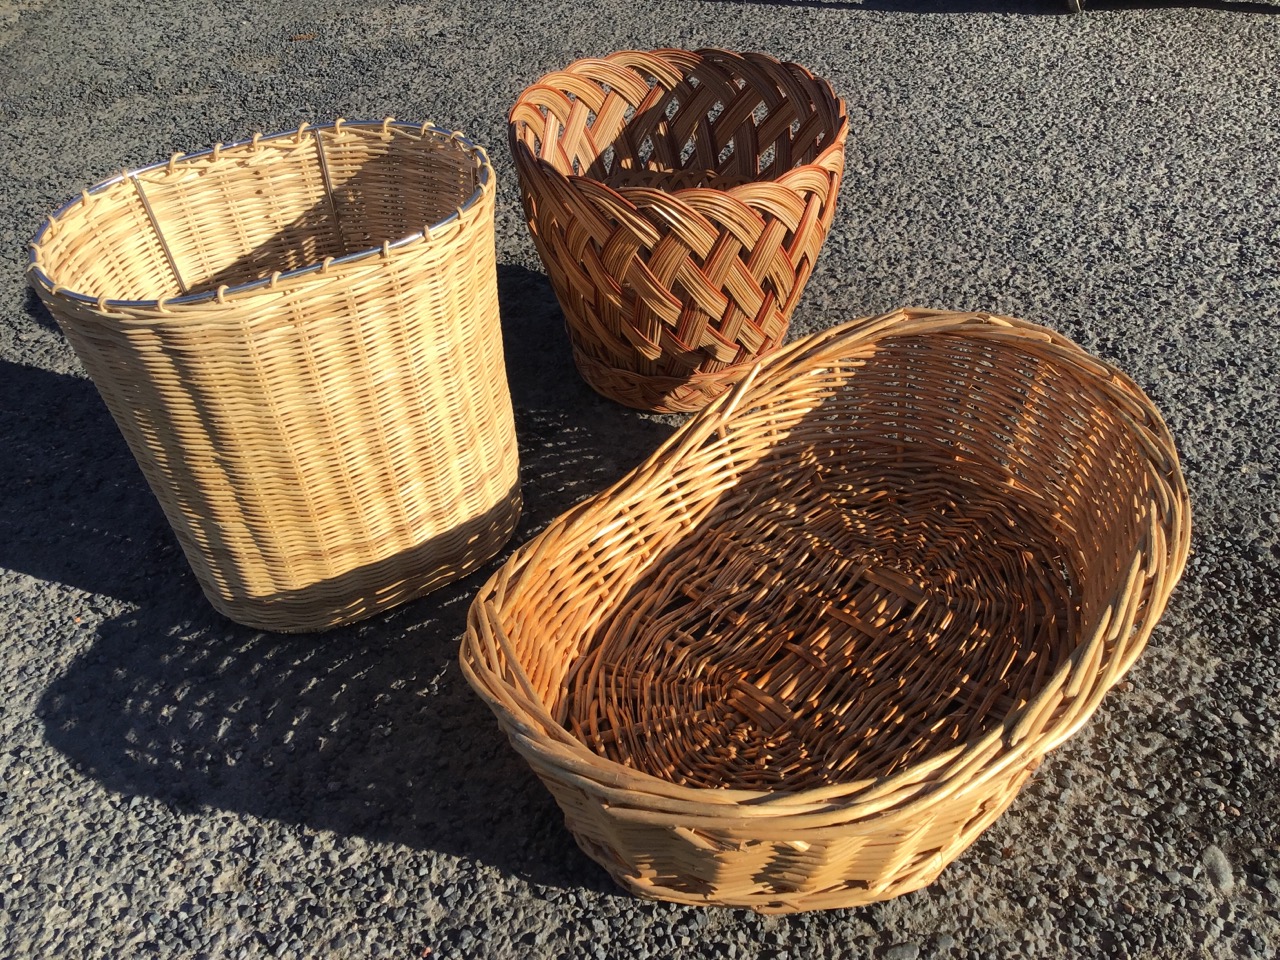 Eight baskets - wastepaper, shopping, dog, oval, bread, etc. (8) - Image 3 of 3